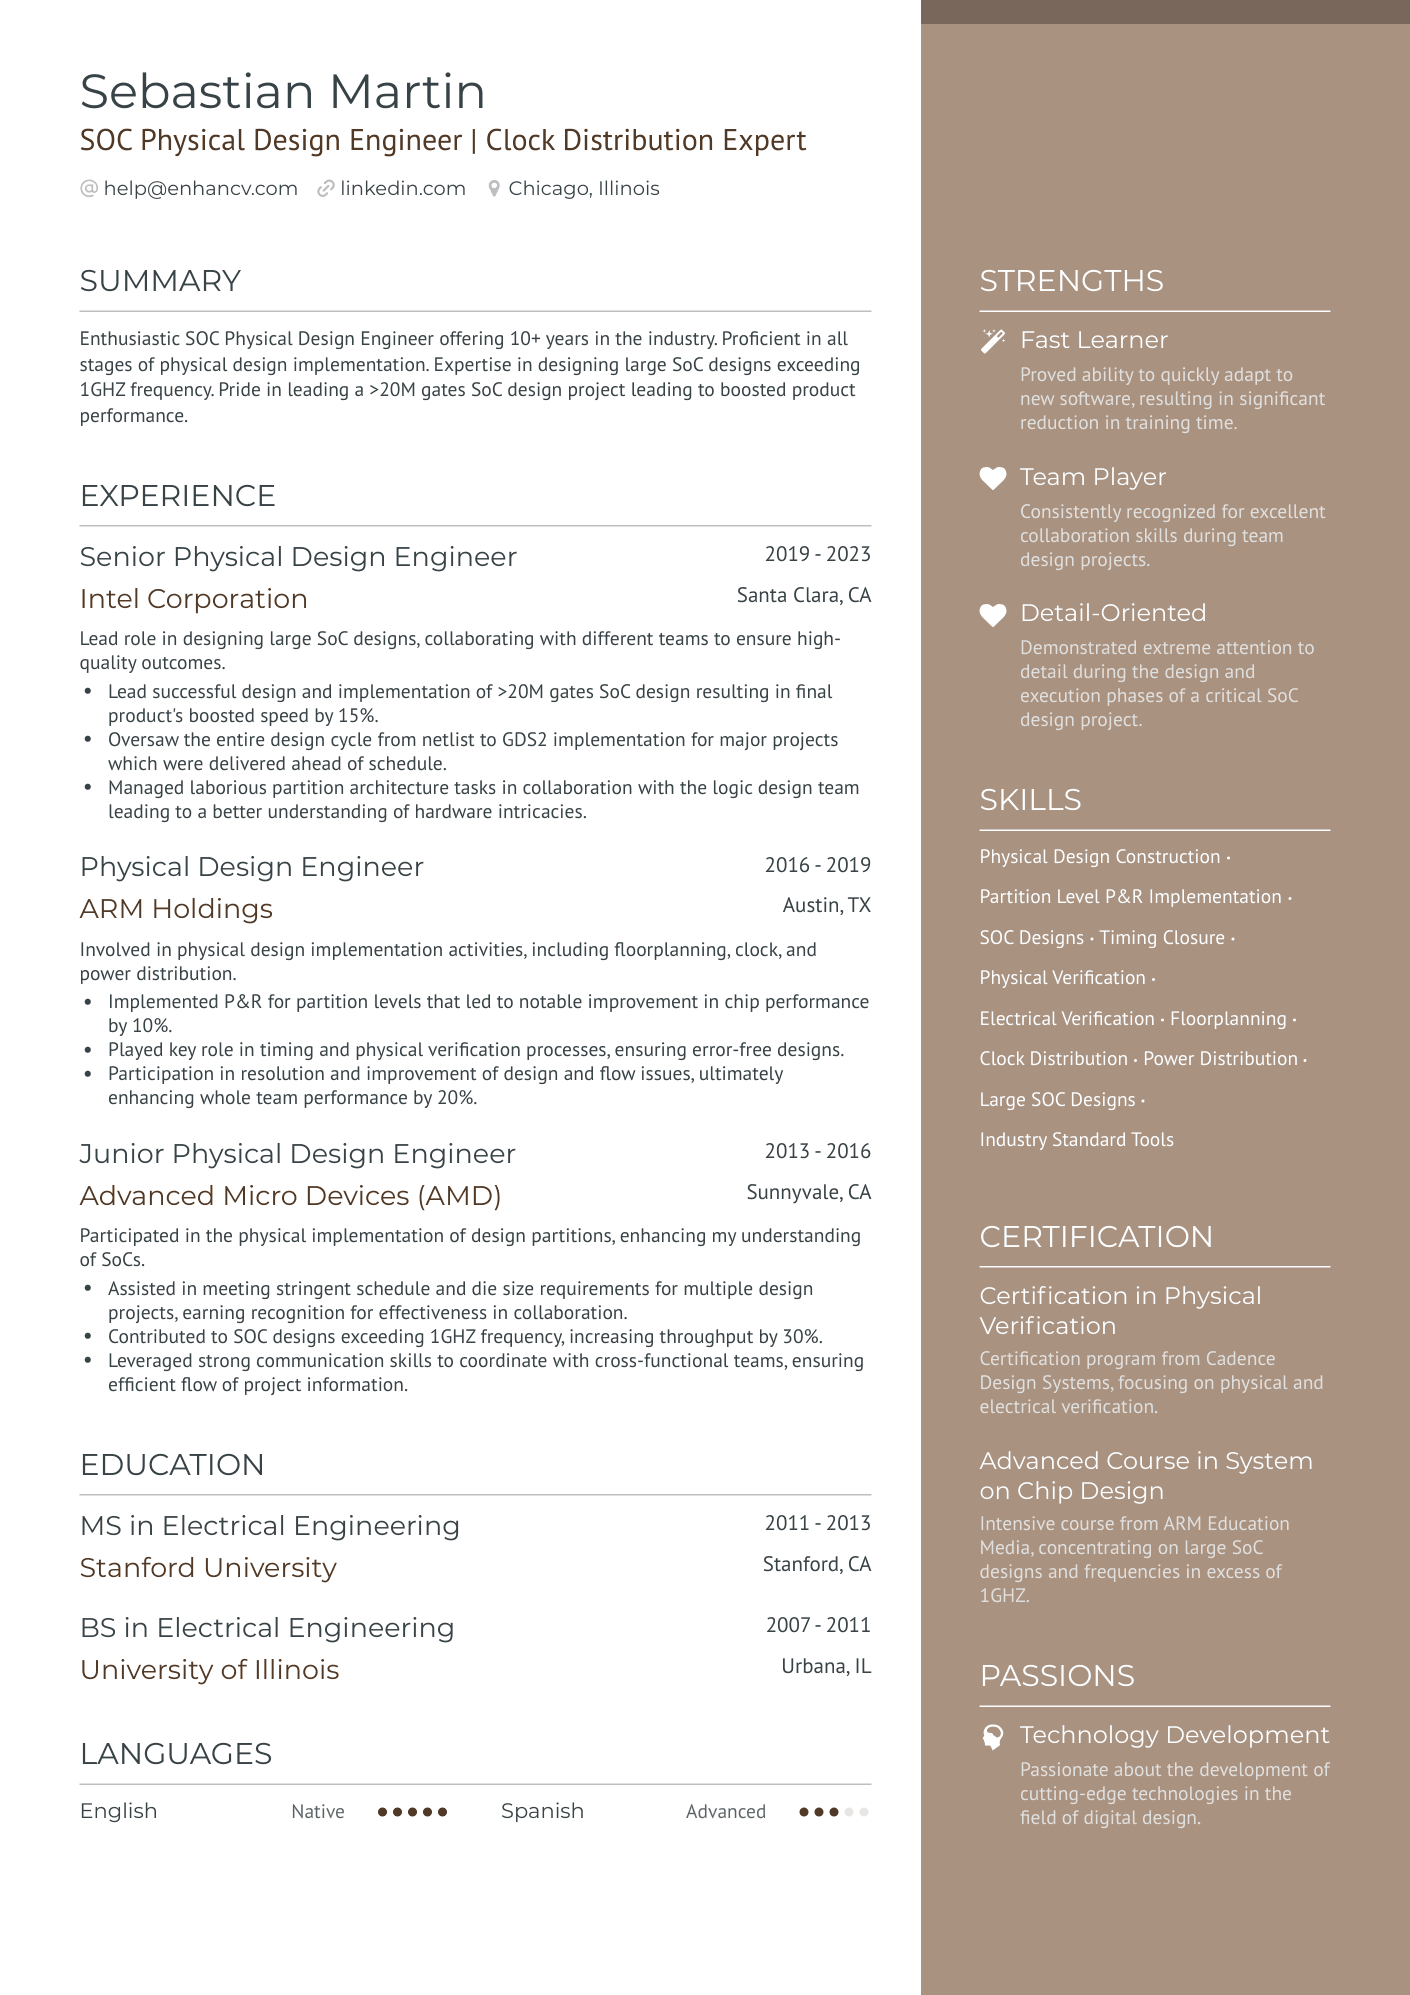 sample resume for mechanical design engineer with experience